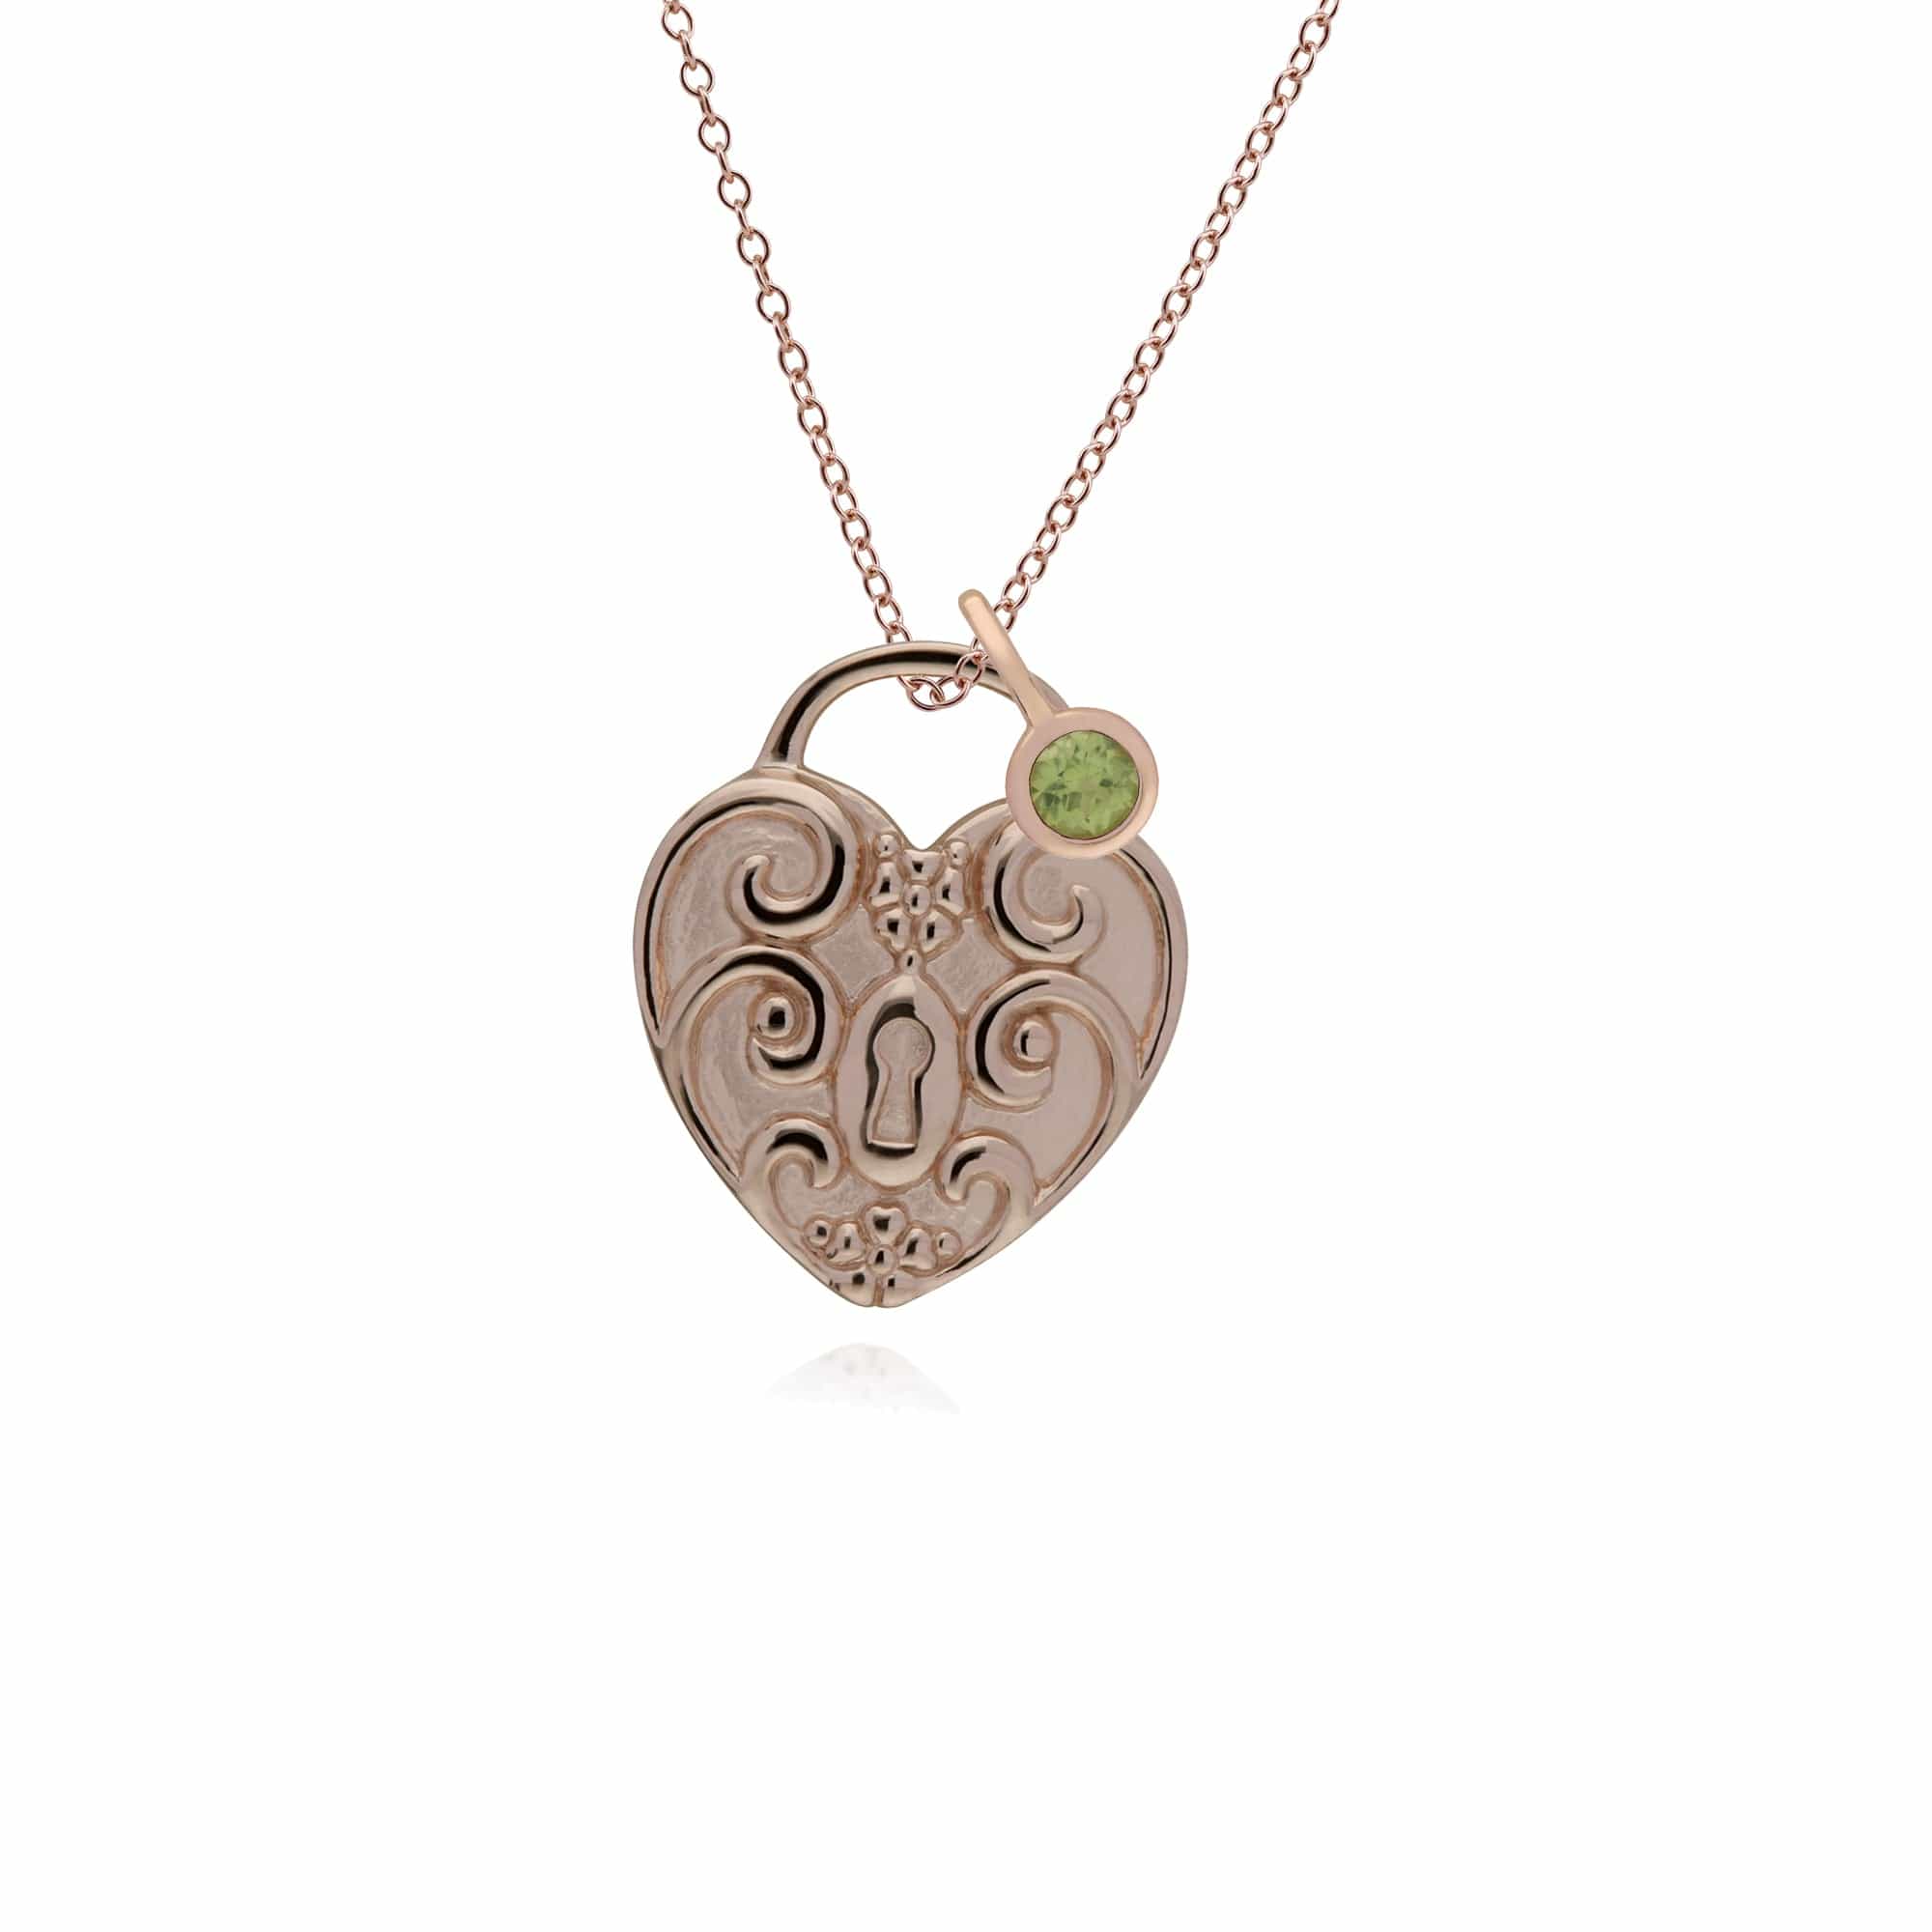 270P027305925-270P026501925 Classic Swirl Heart Lock Pendant & Peridot Charm in Rose Gold Plated 925 Sterling Silver 1